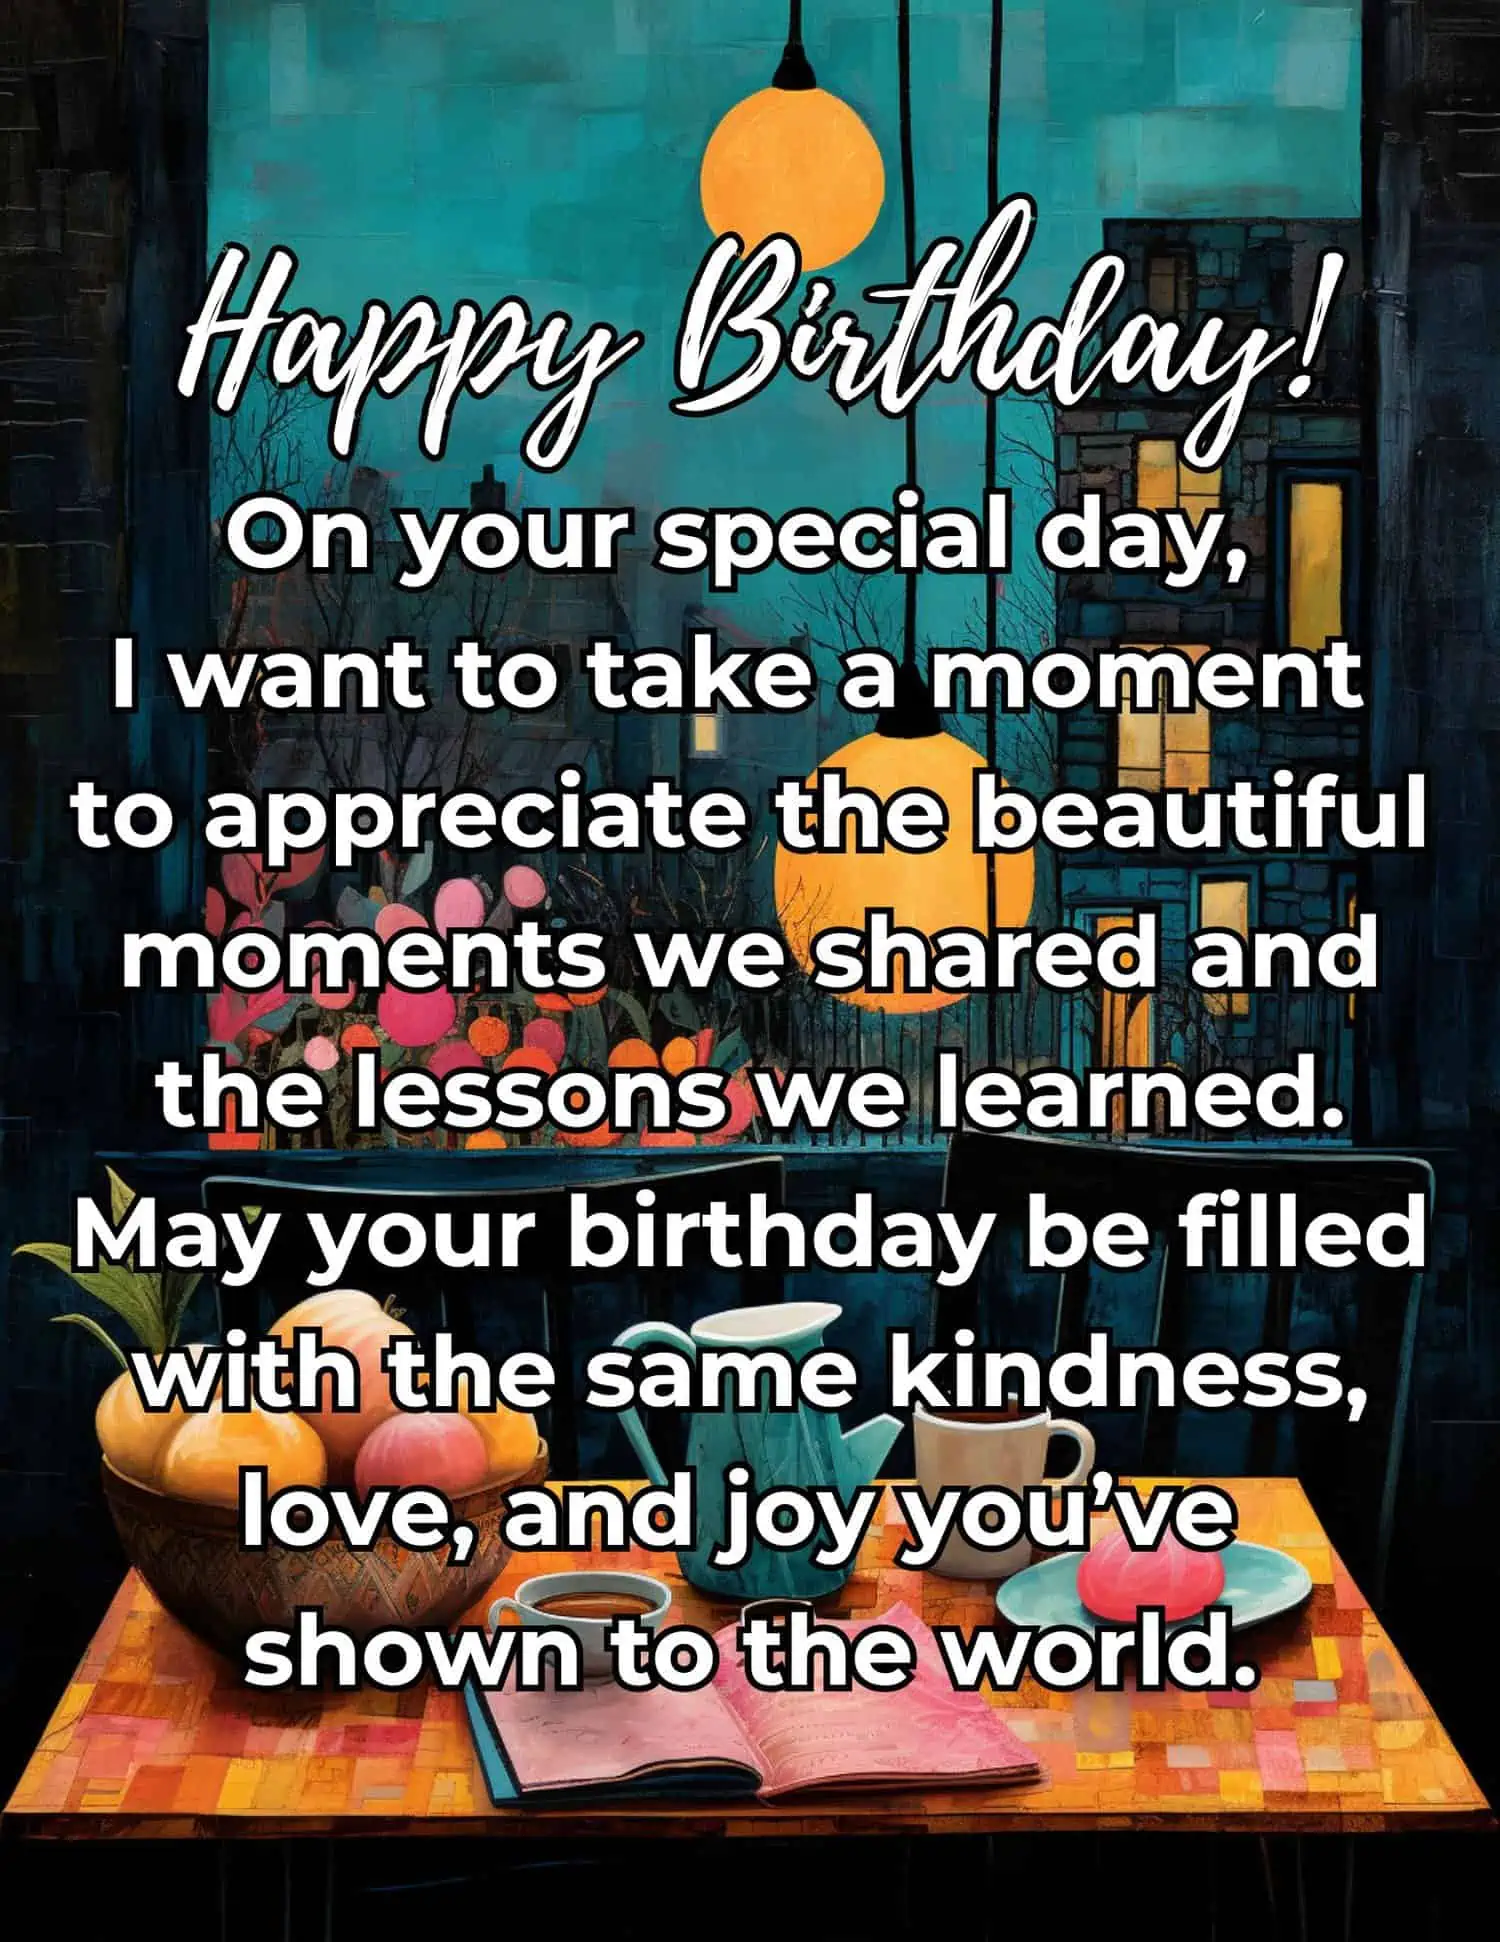 A collection of detailed and heartfelt birthday wishes, ideal for expressing deep and respectful sentiments to an ex-girlfriend on her special day.